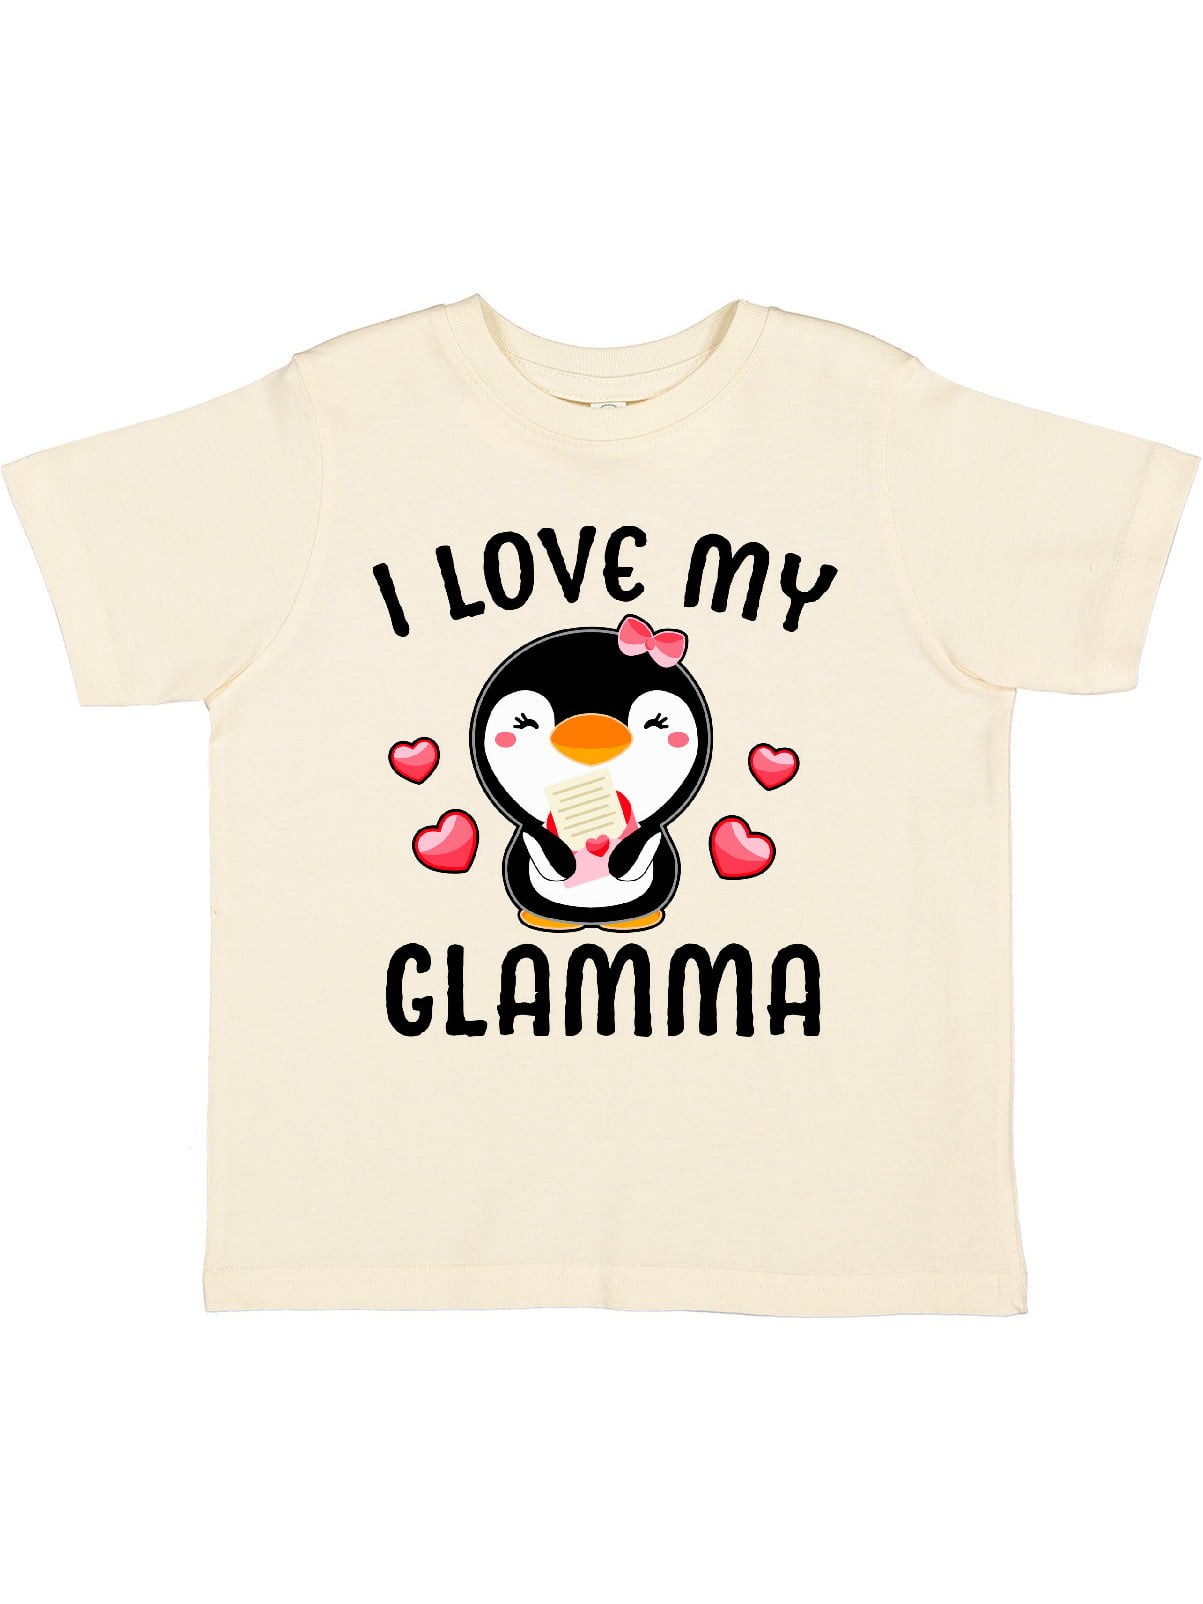 inktastic I Love My Friend with Cute Penguin and Hearts Toddler T-Shirt 